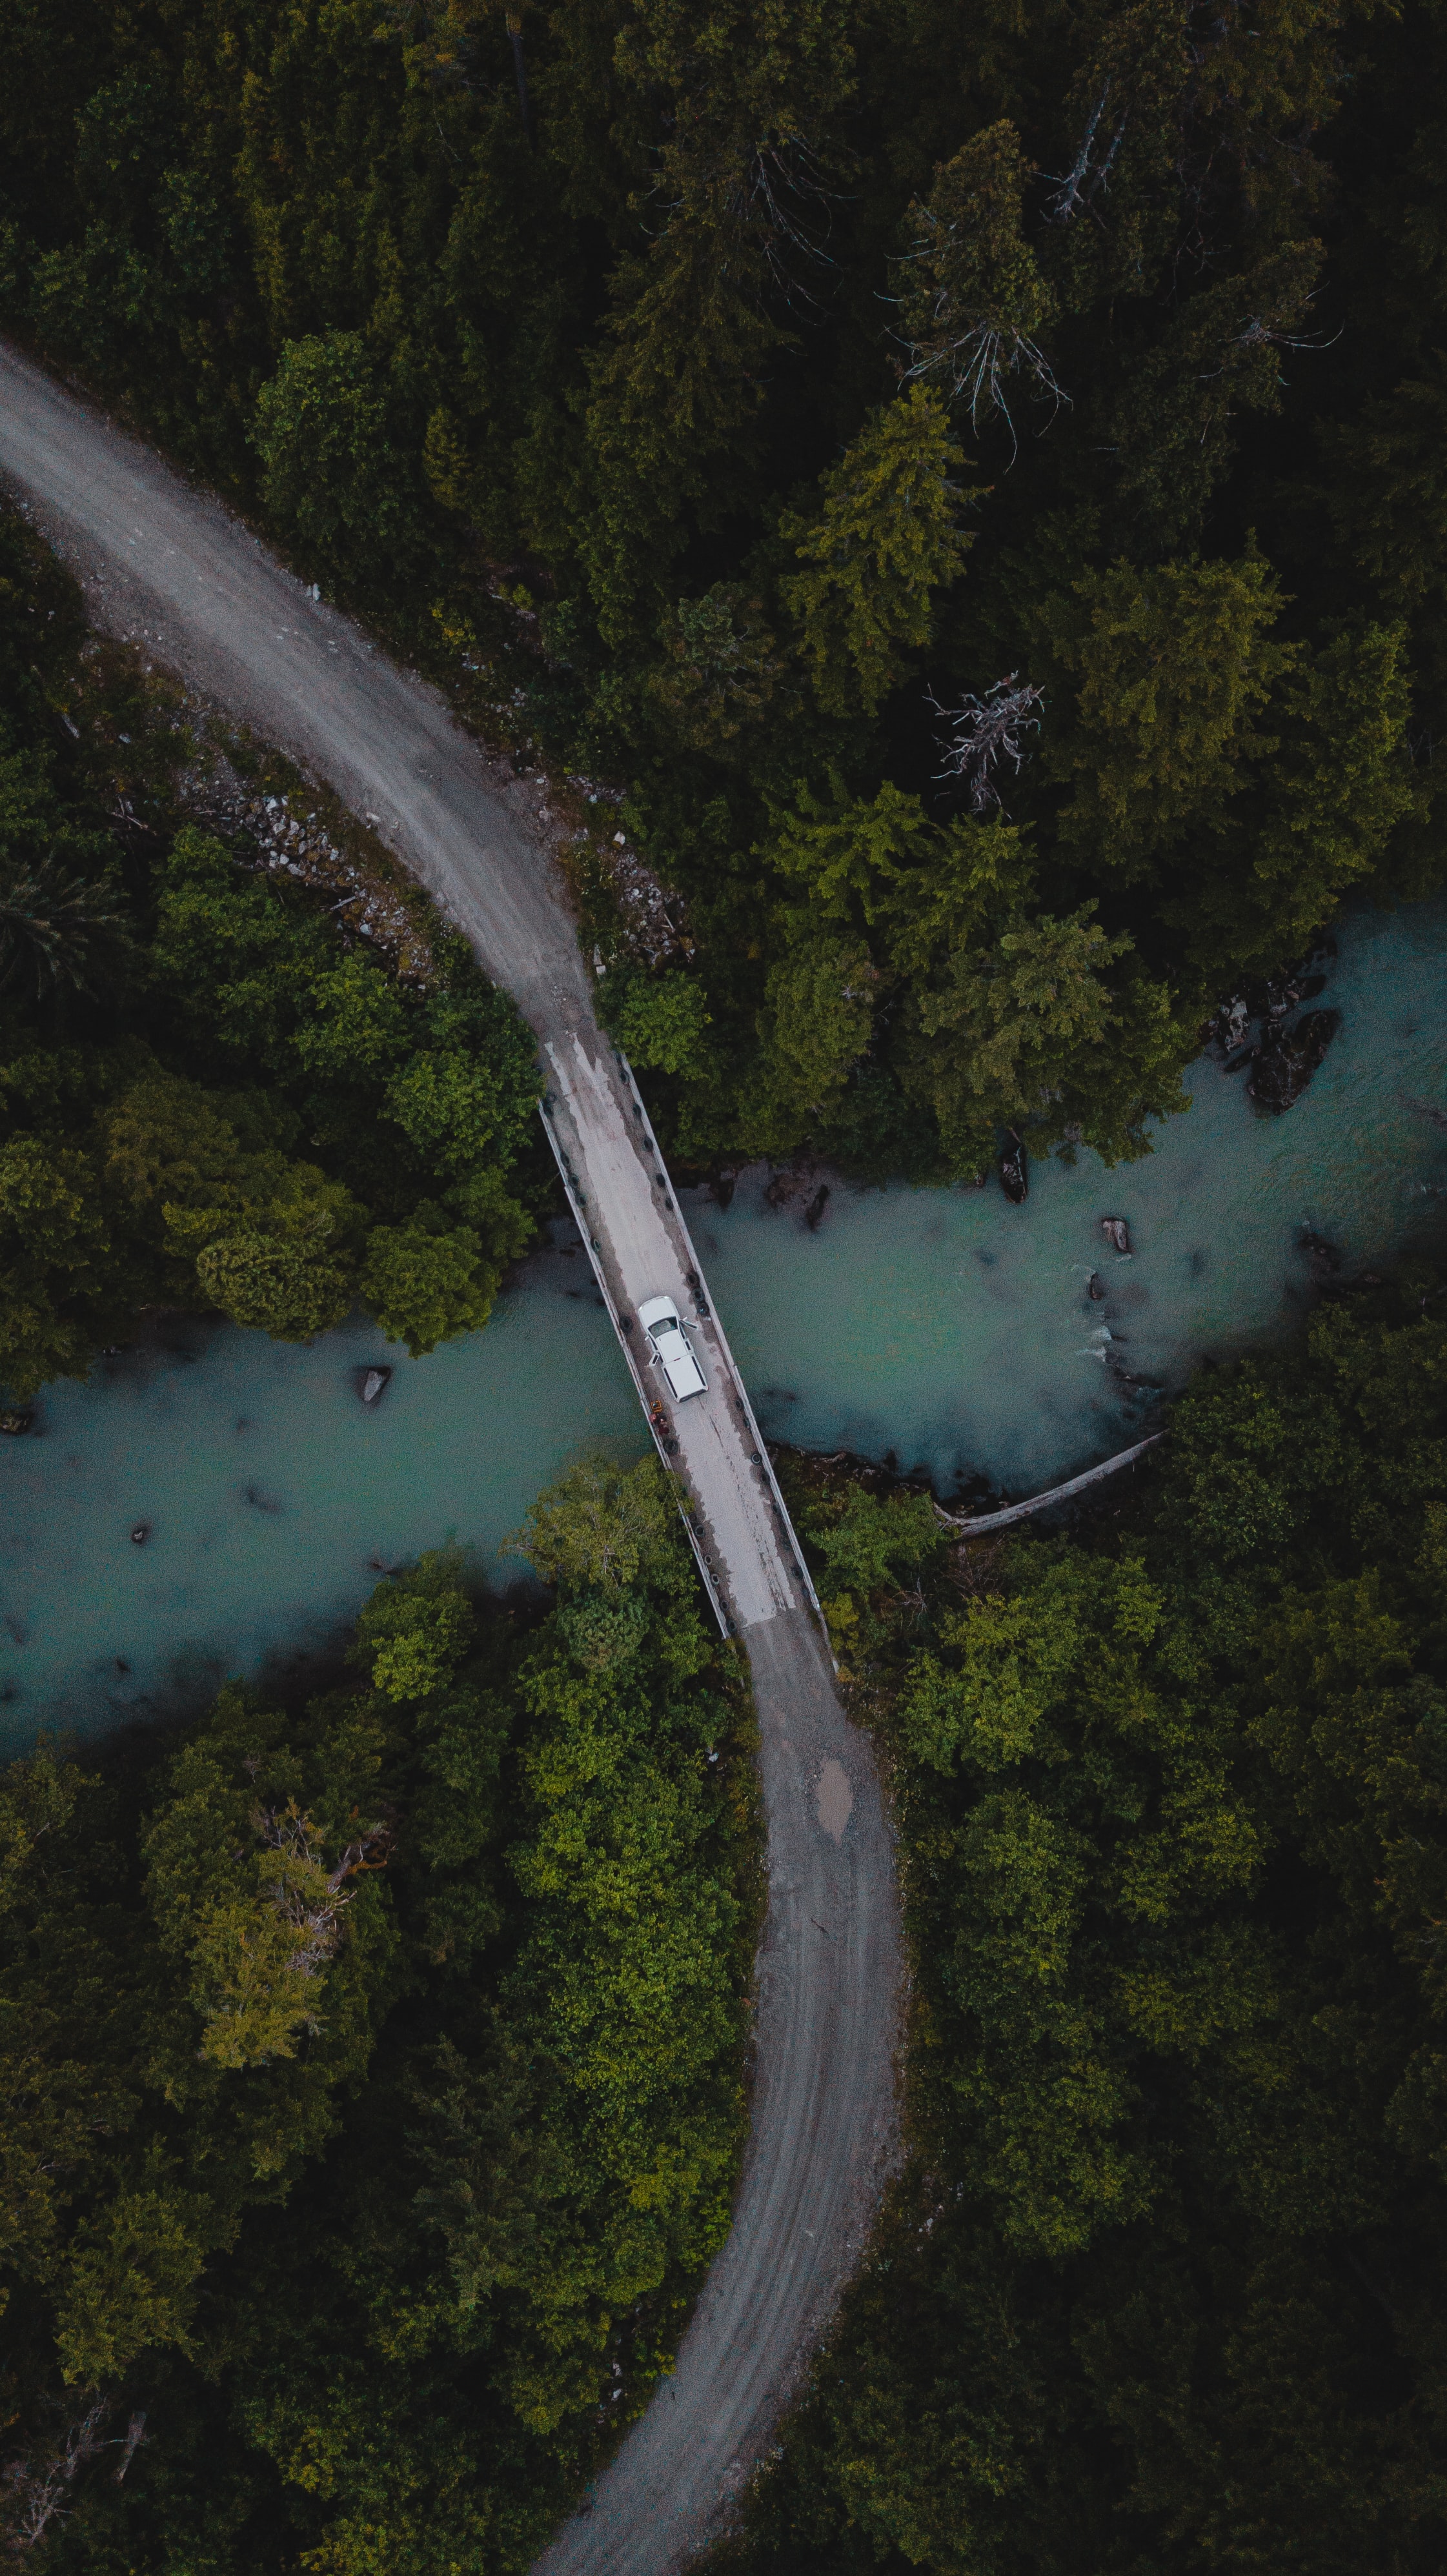 rivers, nature, trees, view from above, forest, car, machine, bridge Image for desktop